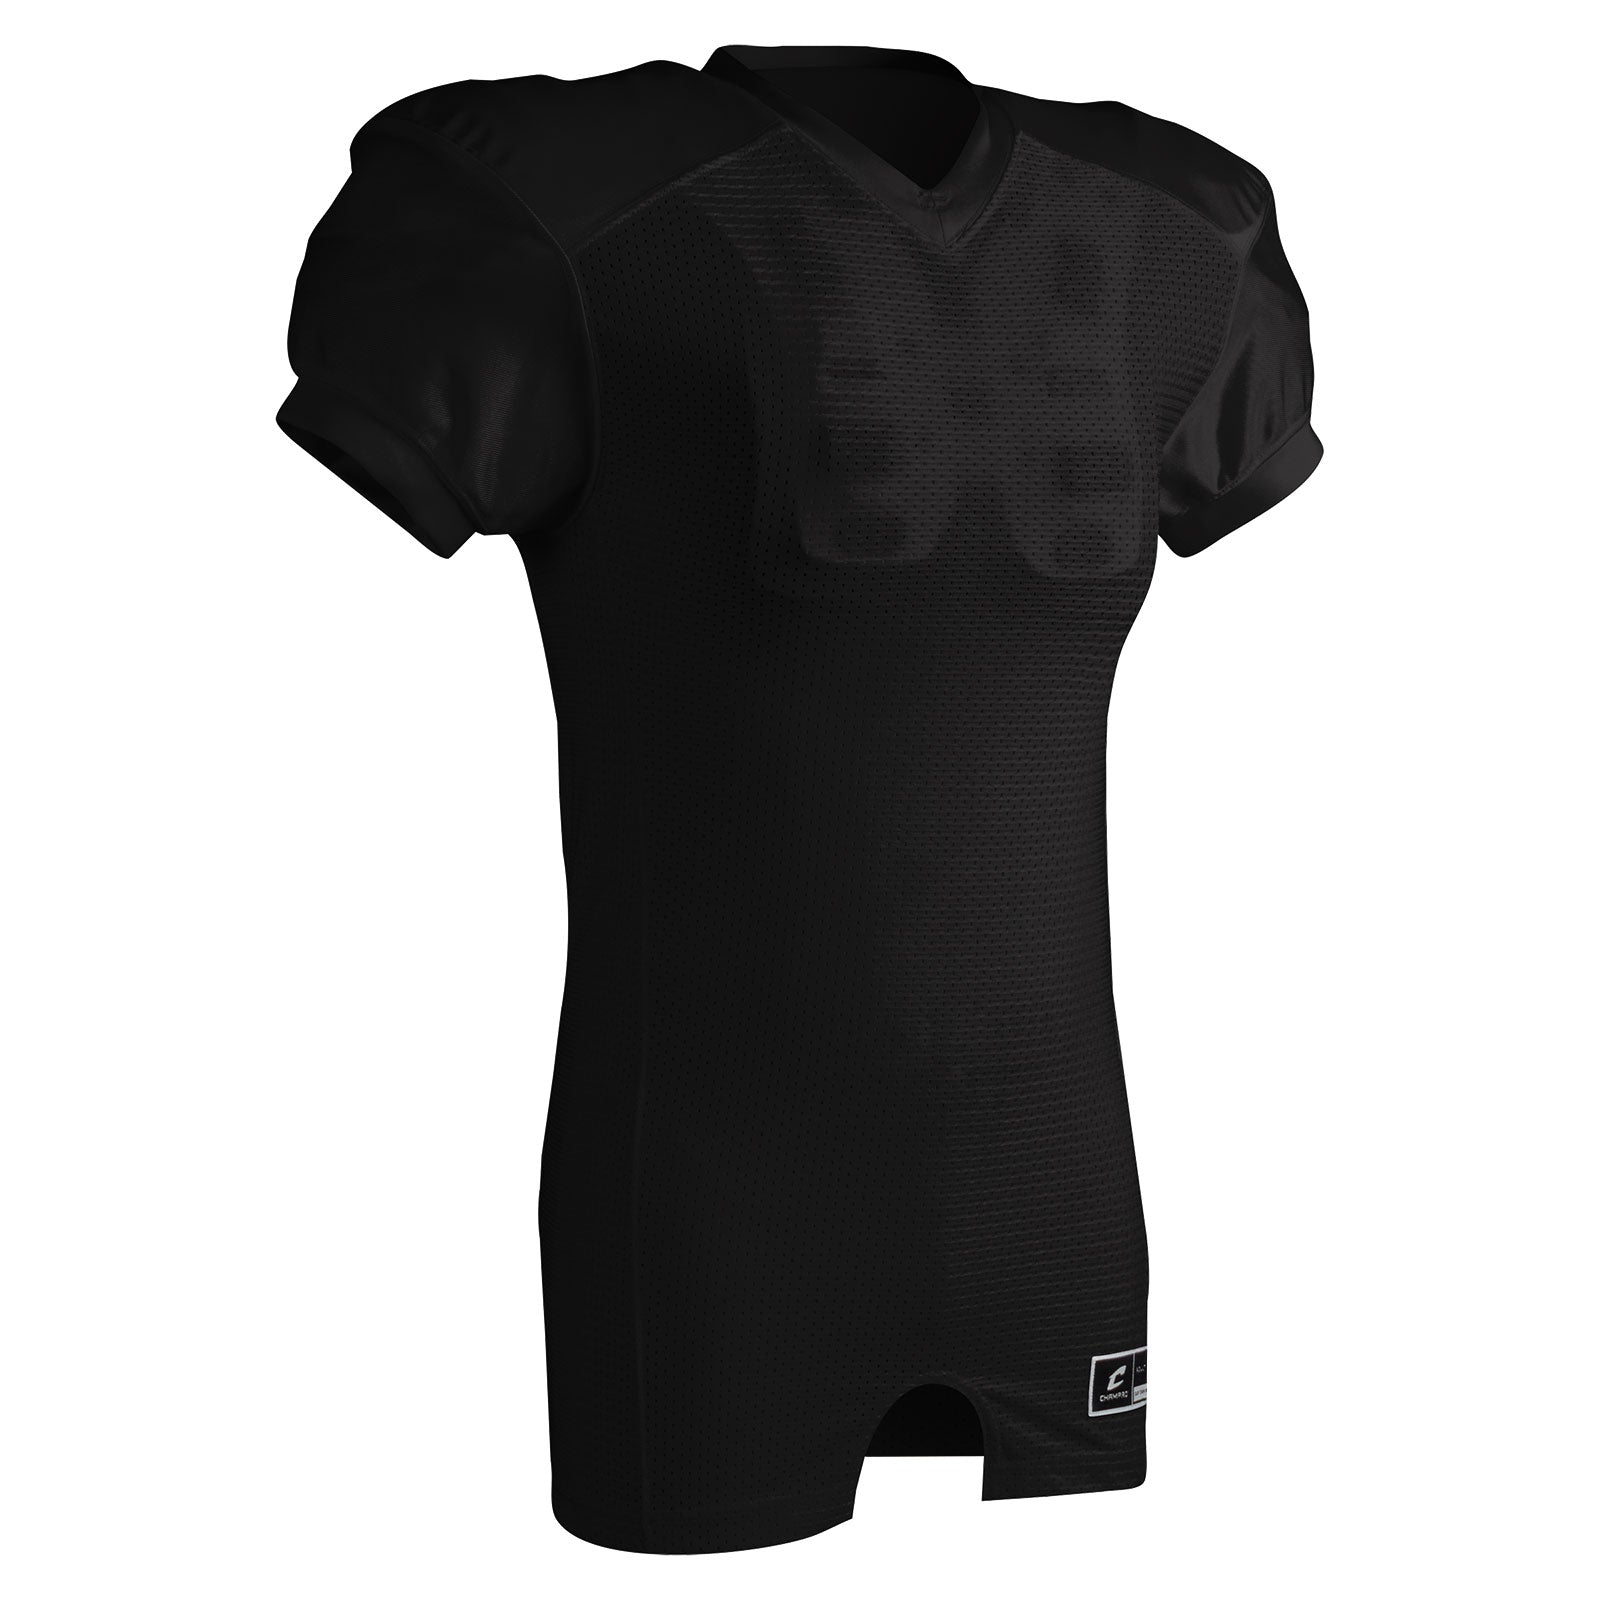 Pro-Fit Collegiate Fit Football Game Jersey BLACK BODY